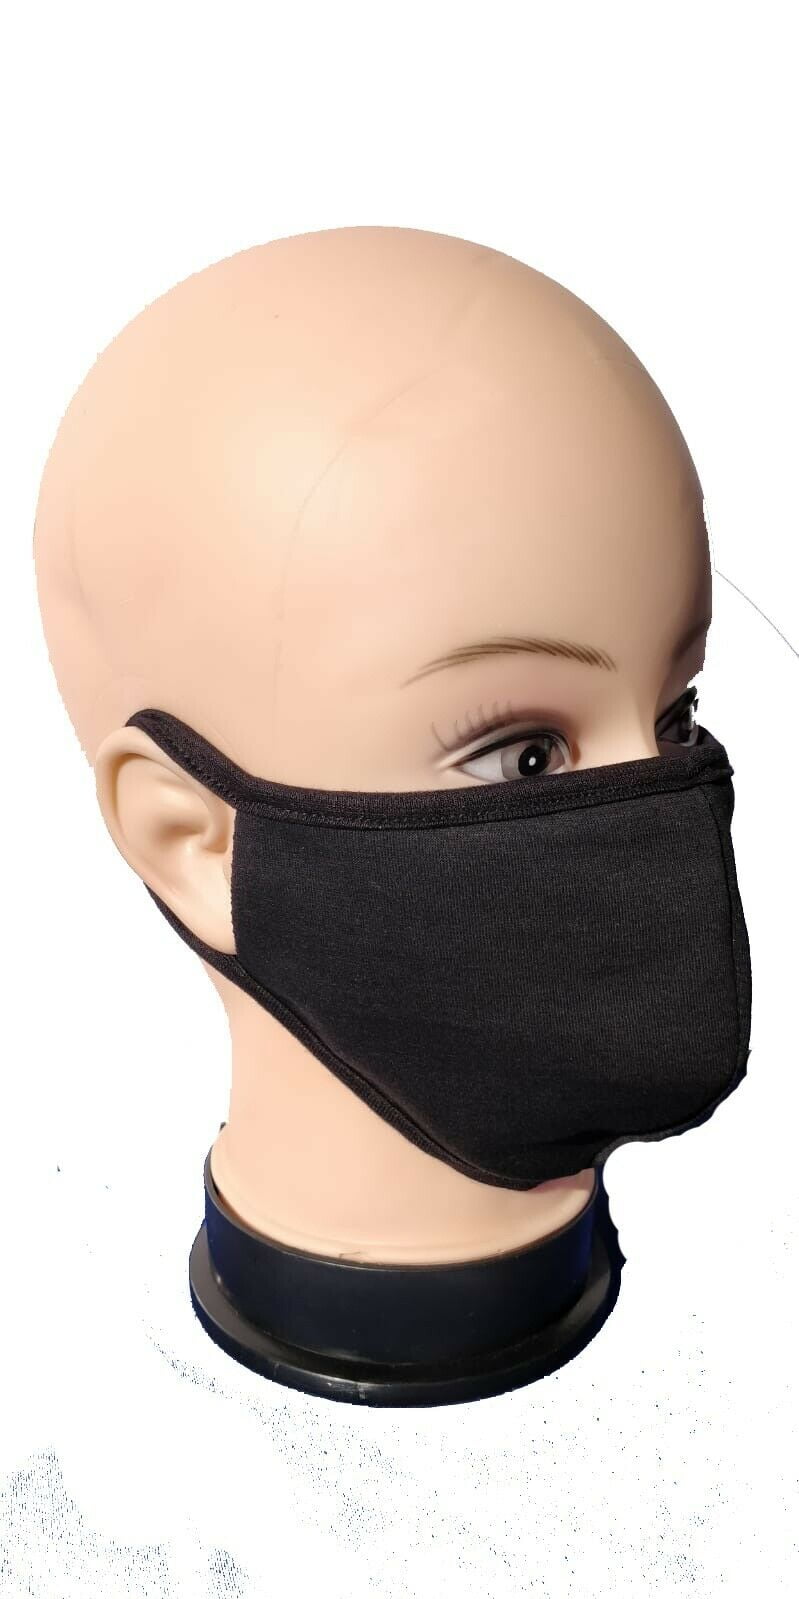 Face Mask Reversible Protect Mouth Nose USA Reusable Cotton Double Layer Unisex 